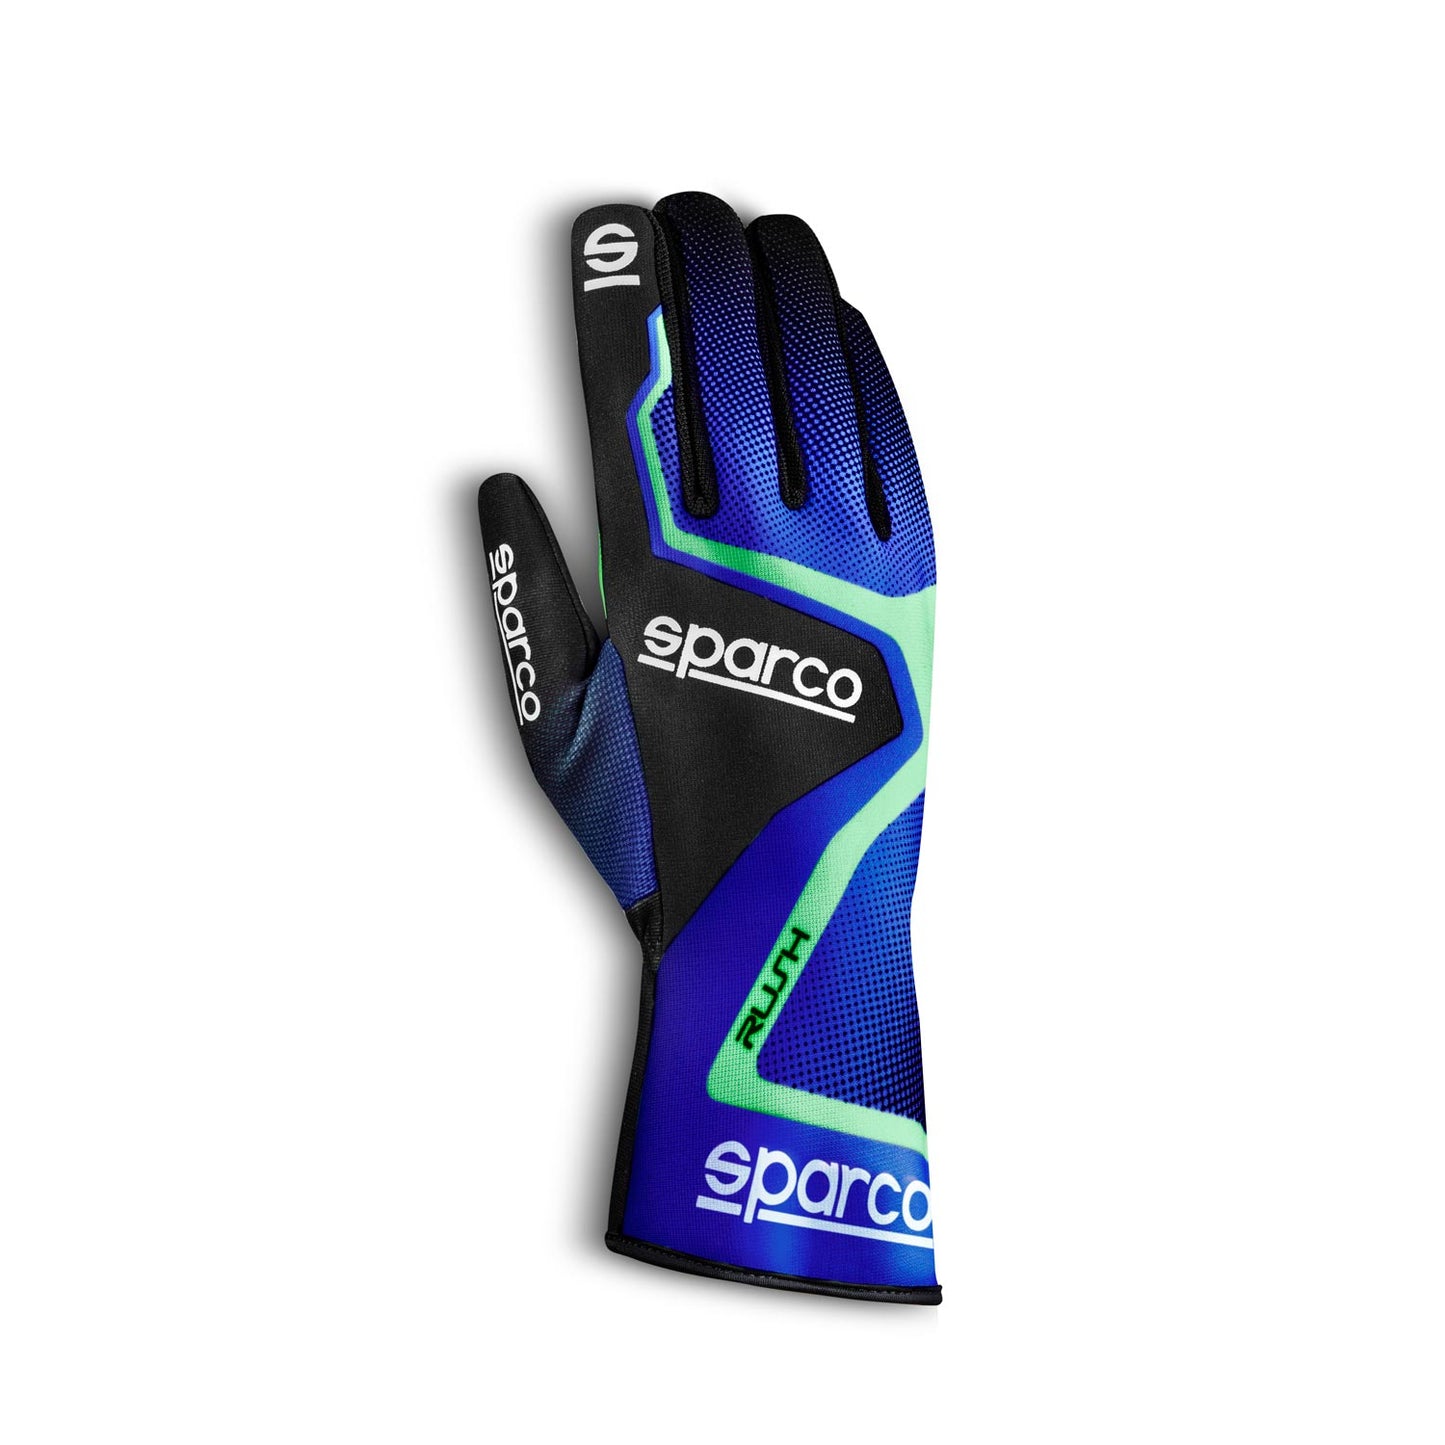 Sparco RUSH MY20 Karting Gloves